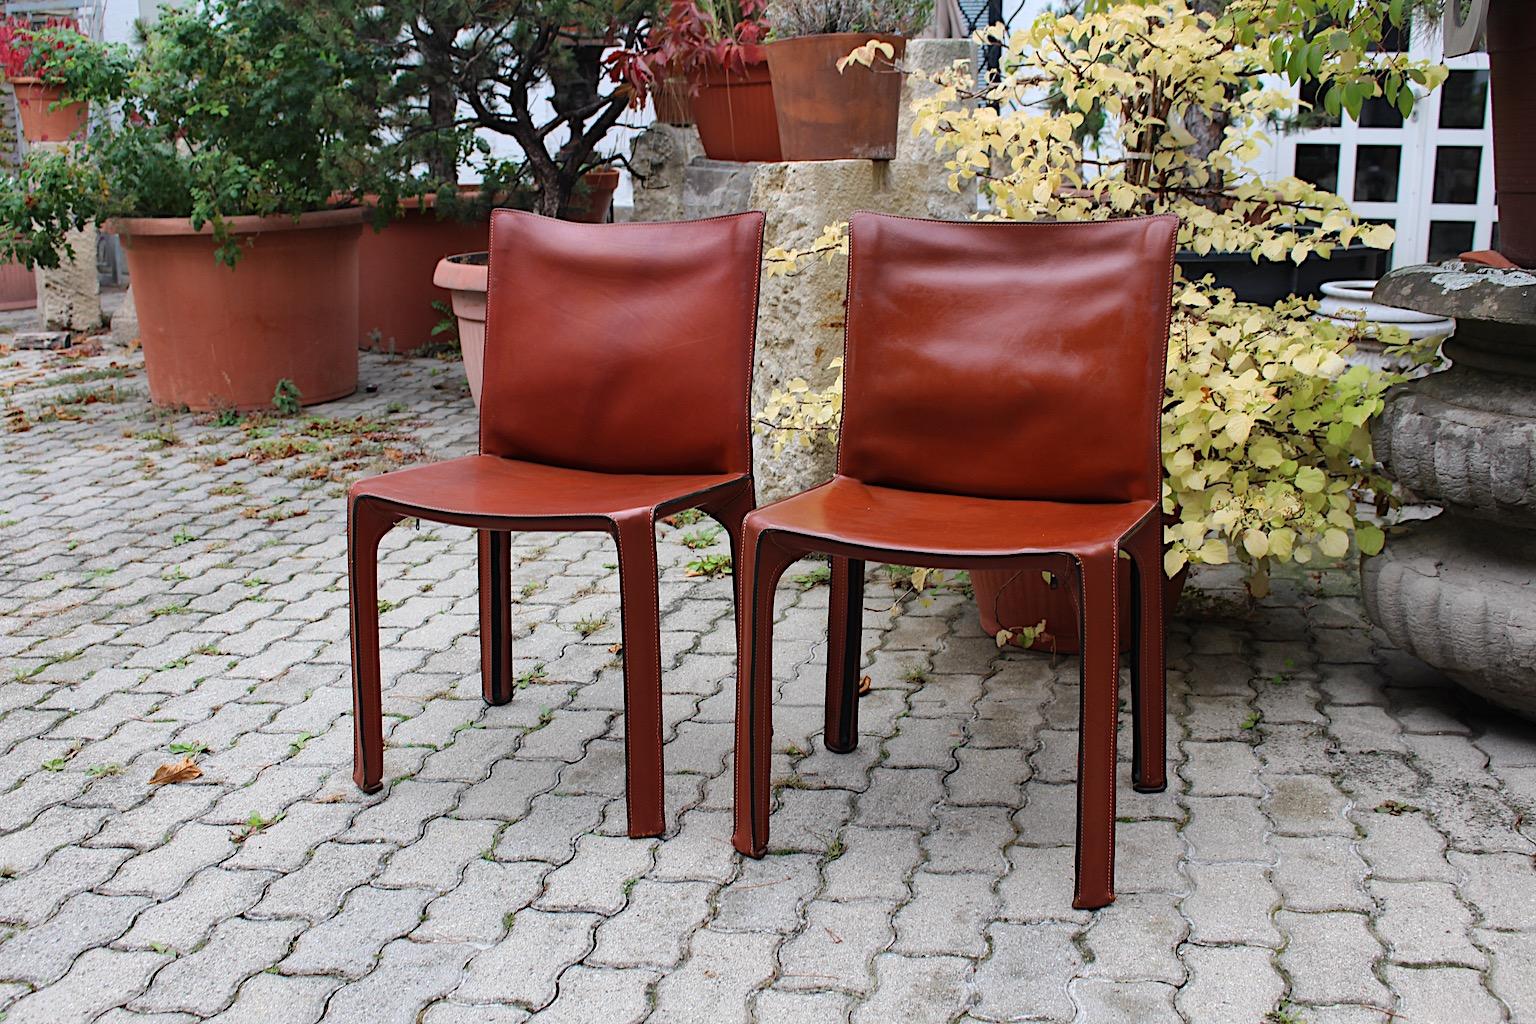 Mario Bellini duo pair two (2) vintage dining chairs or side chairs model CAB 412
from cognac brown leather designed 1970s, Italy.
A timeless and sleek modern design icon, the CAB chair 412 by Mario Bellini from stitched thick leather in stunning